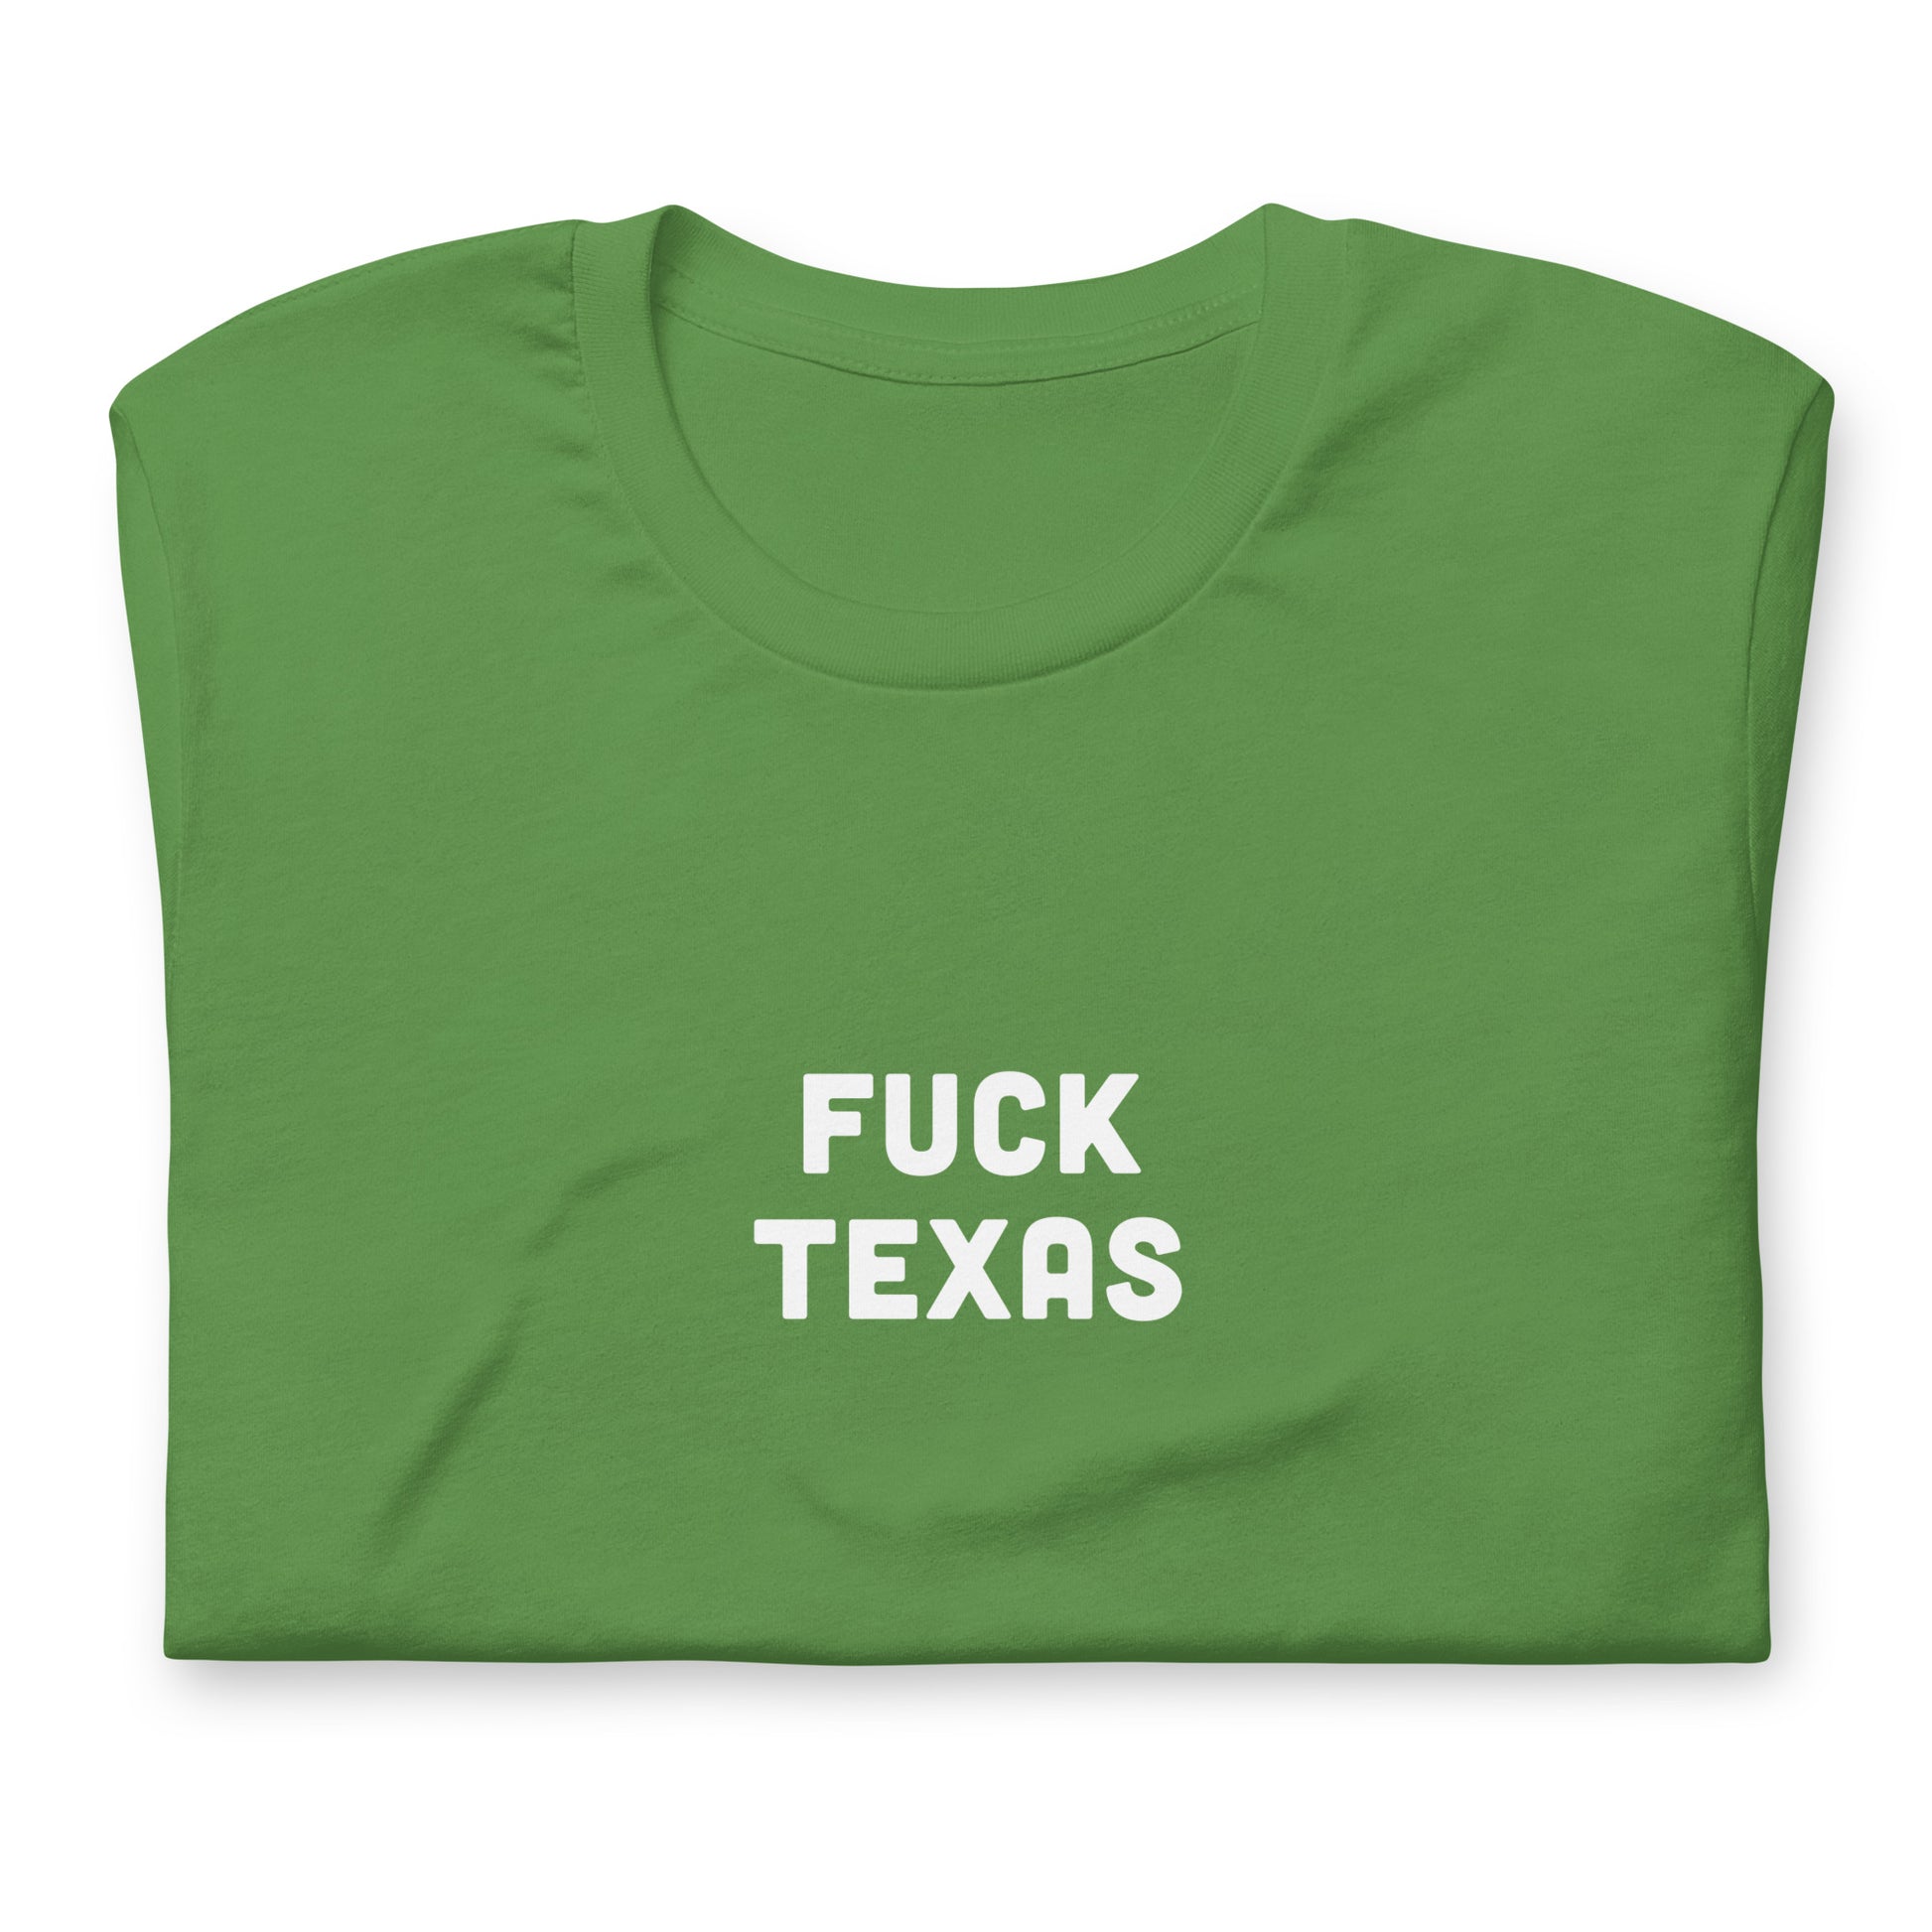 Fuck Texas T-Shirt Size XL Color Forest